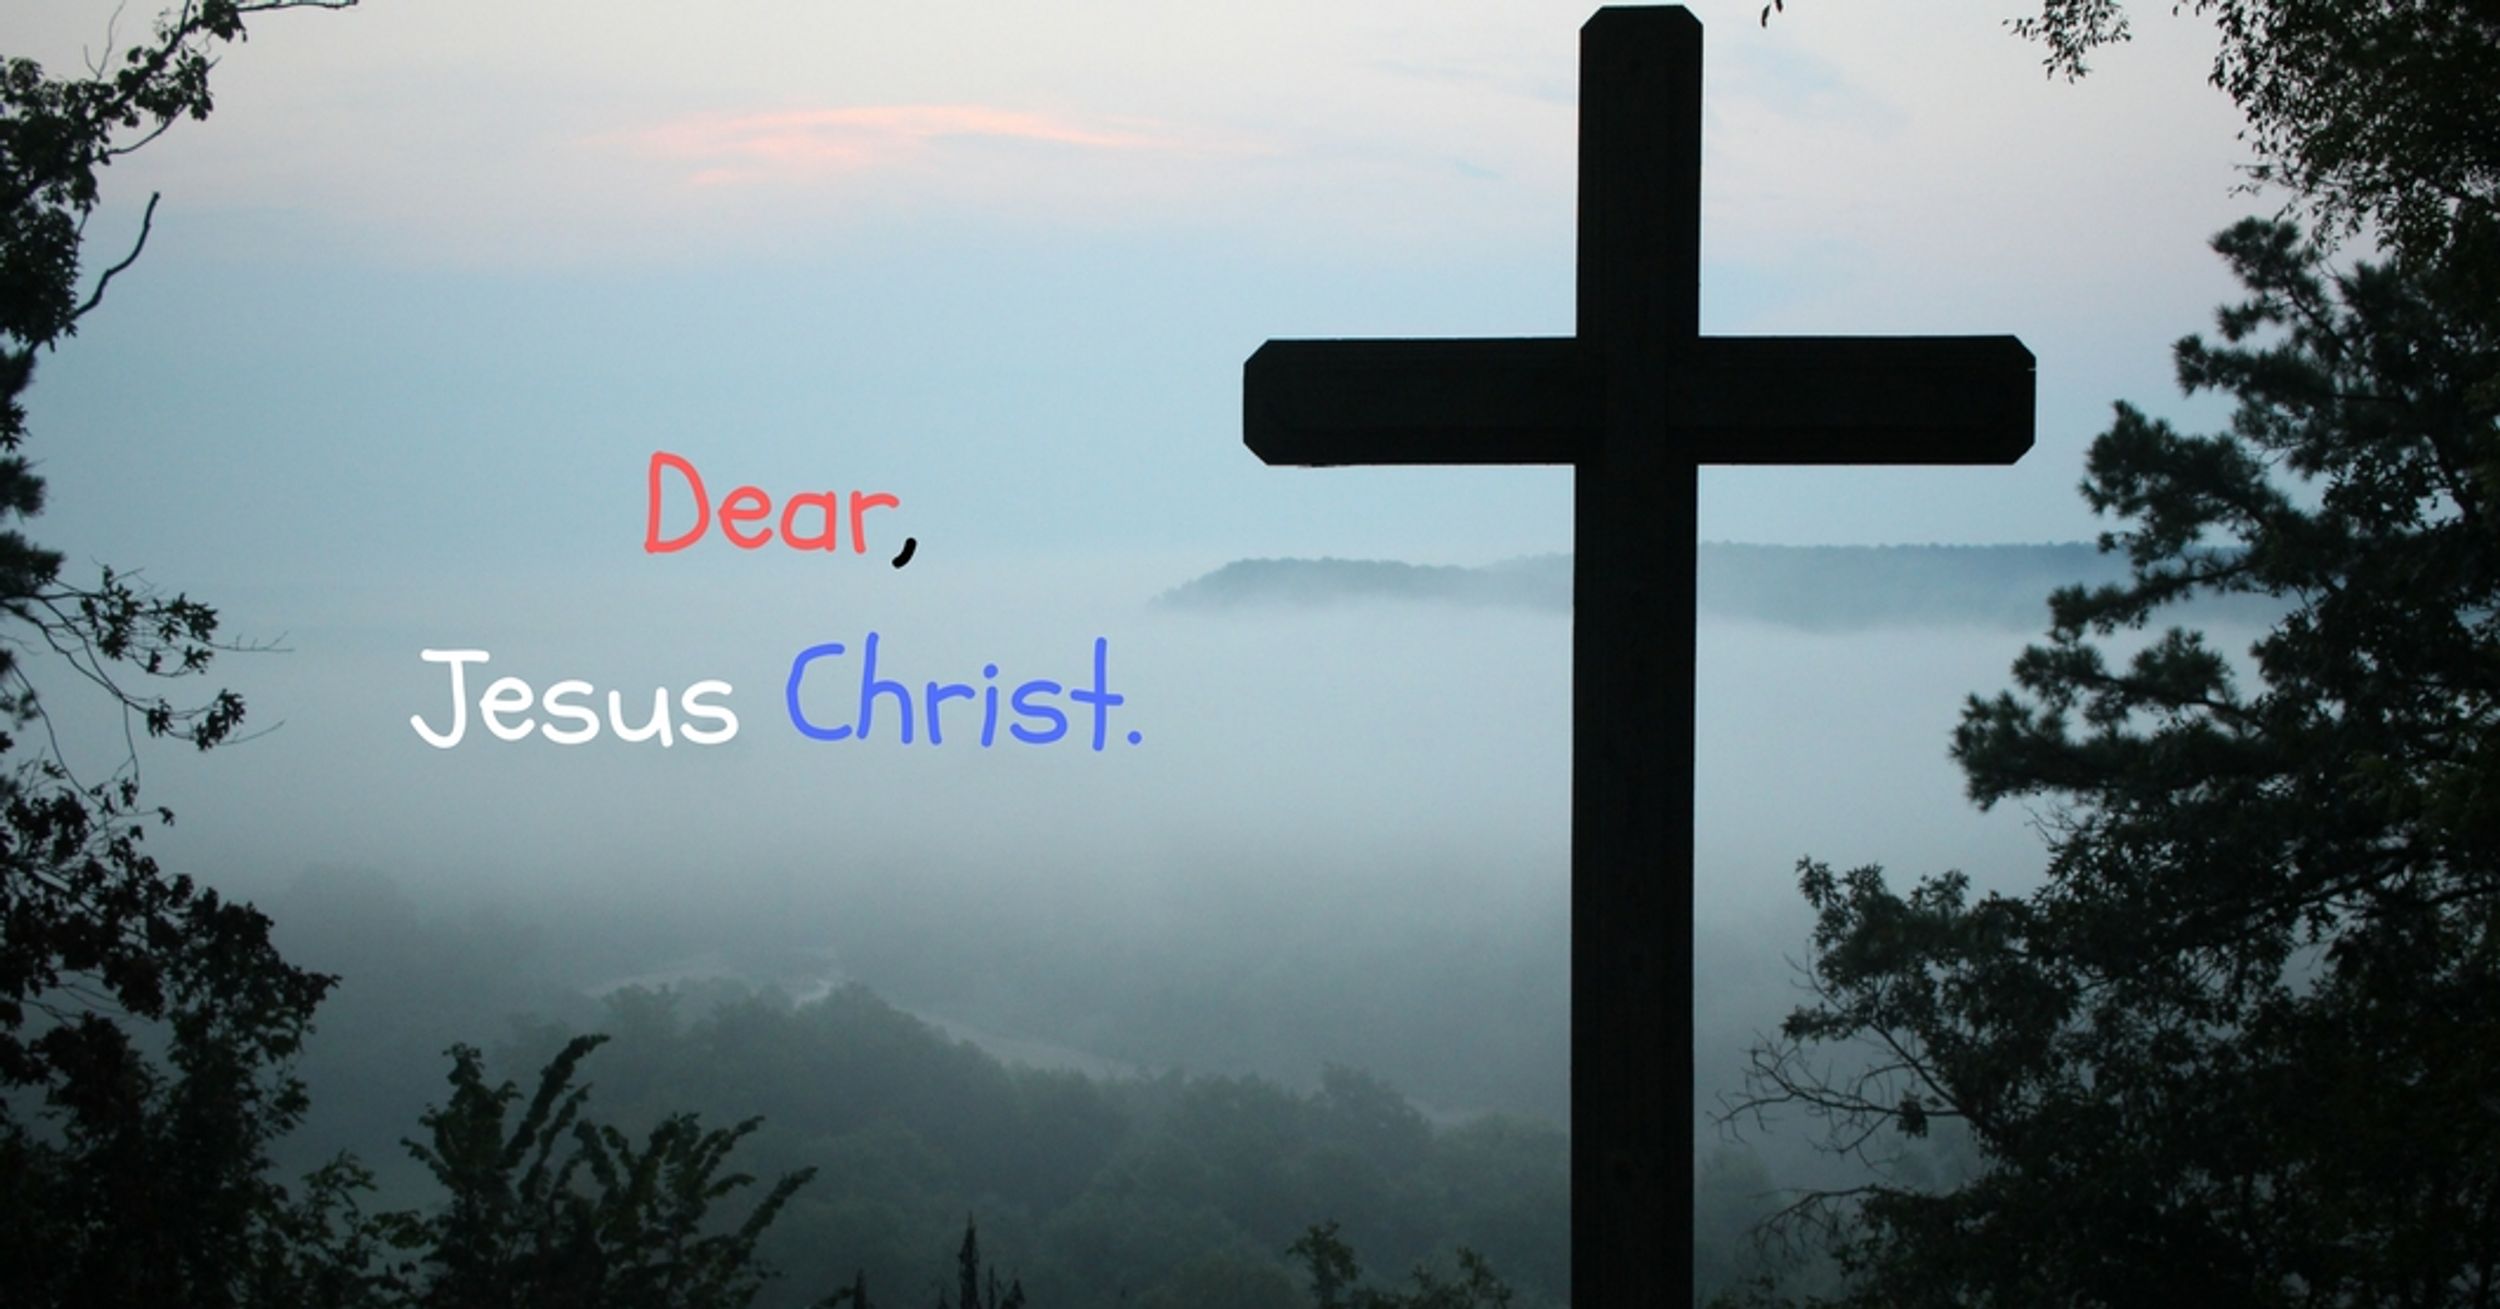 A Letter To Jesus Christ